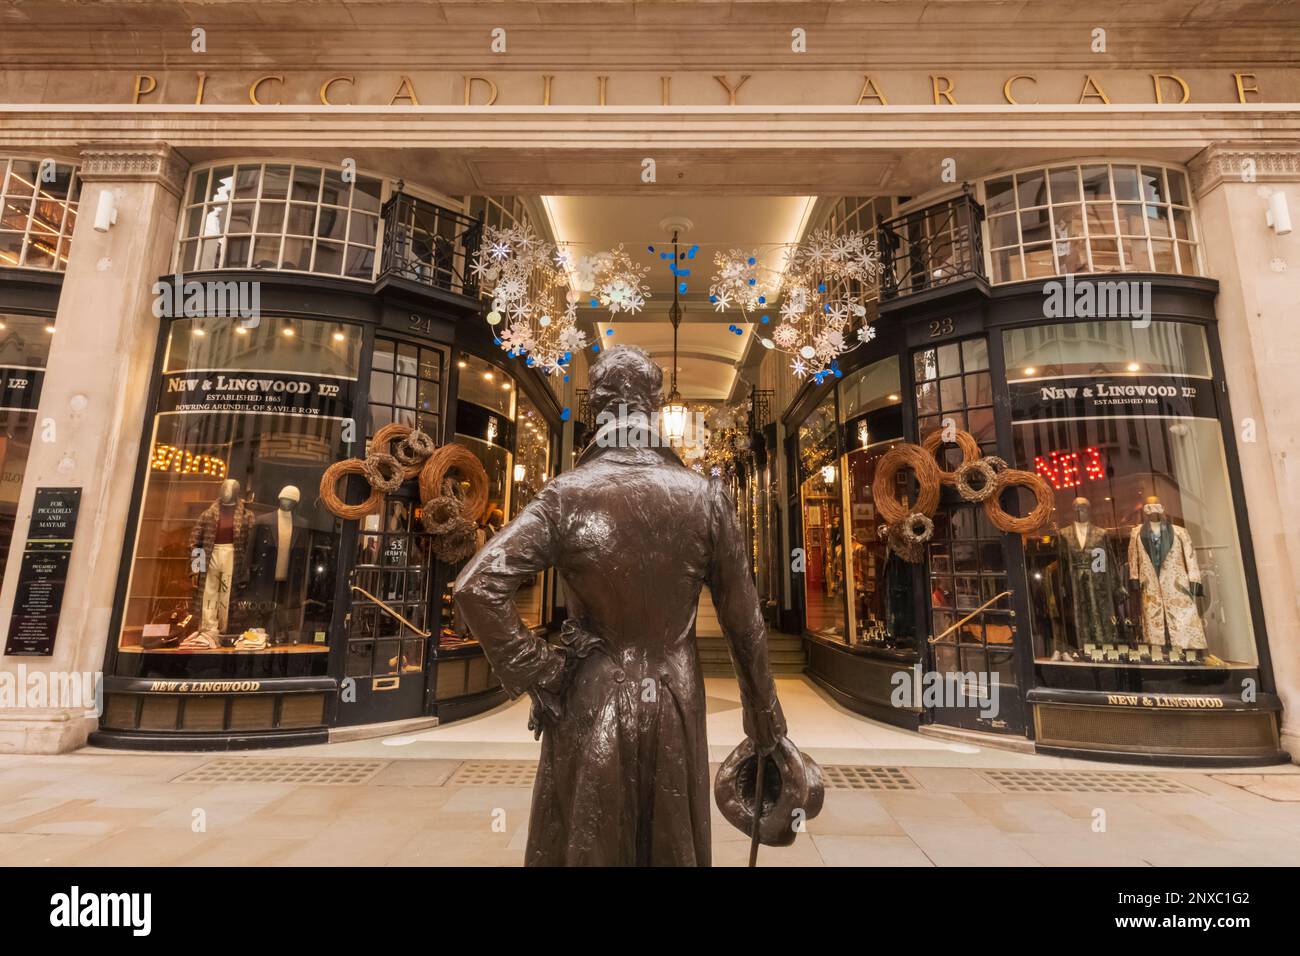 England, London, Piccadilly, Piccadilly Arcade, Arcade Entrance and Statue of Beau Brummell Stock Photo